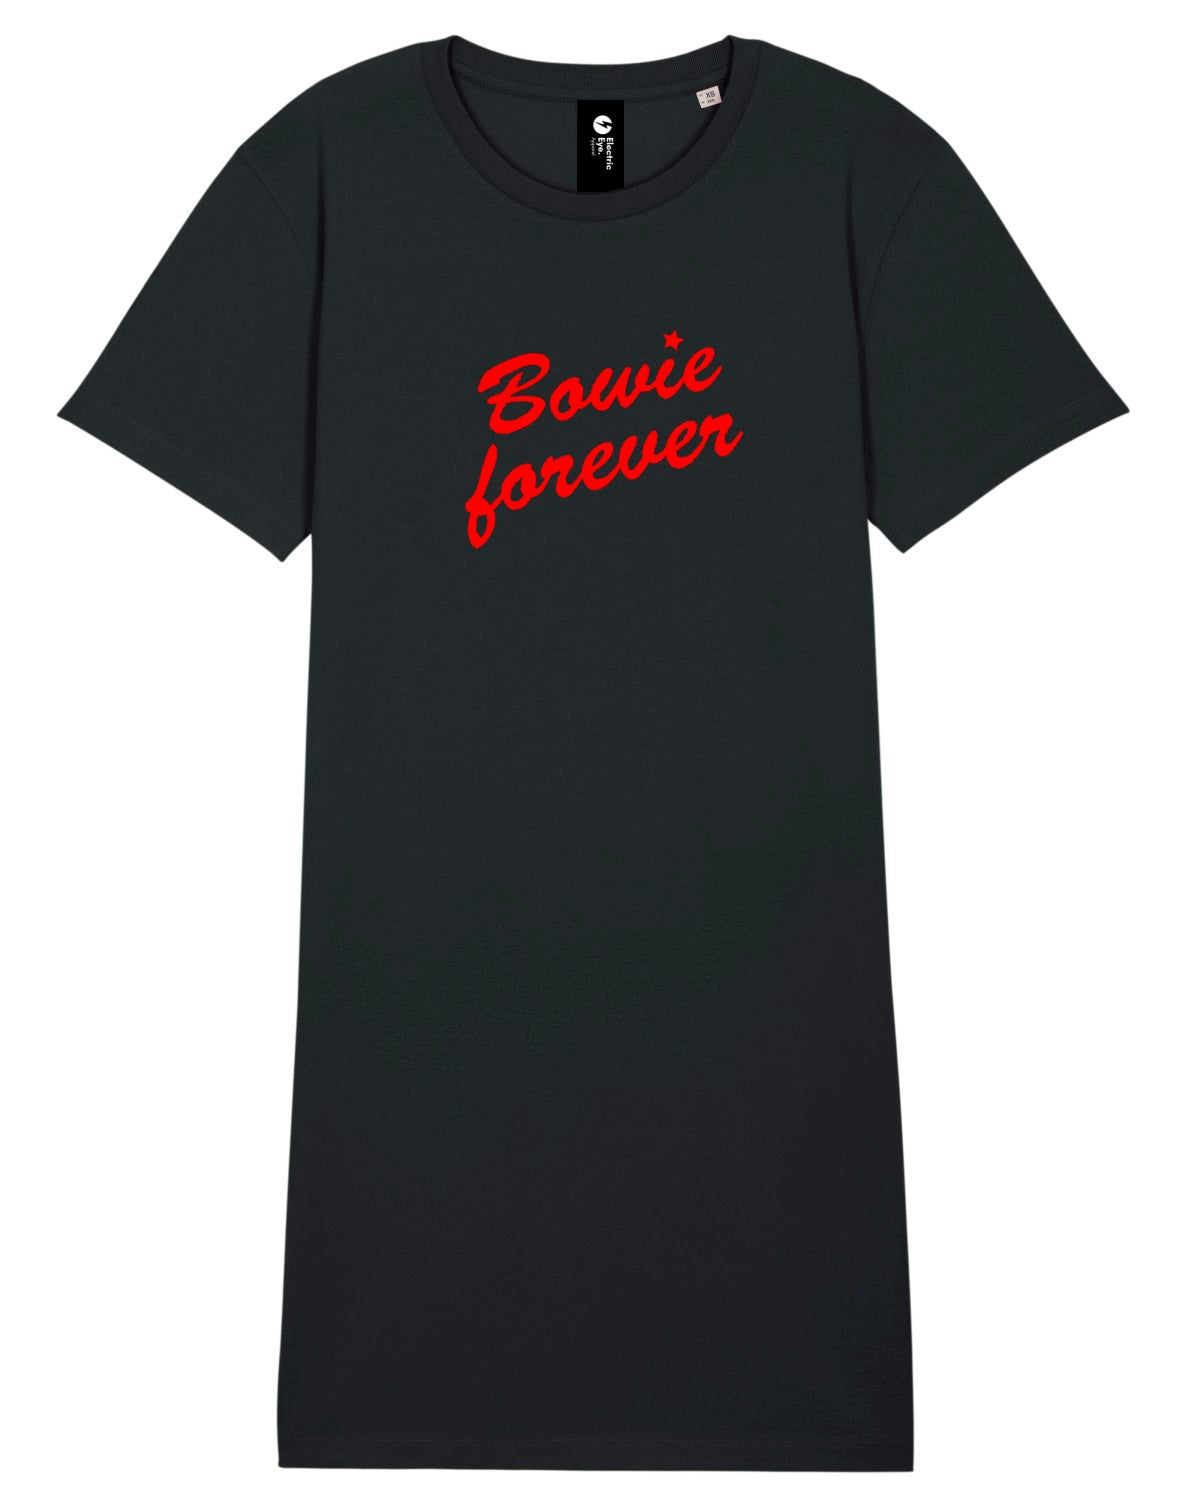 SAMPLE SALE 'BOWIE FOREVER' (WITH STAR DETAIL) EMBROIDERED WOMEN'S ORGANIC COTTON T-SHIRT DRESS (SIZE MEDIUM)